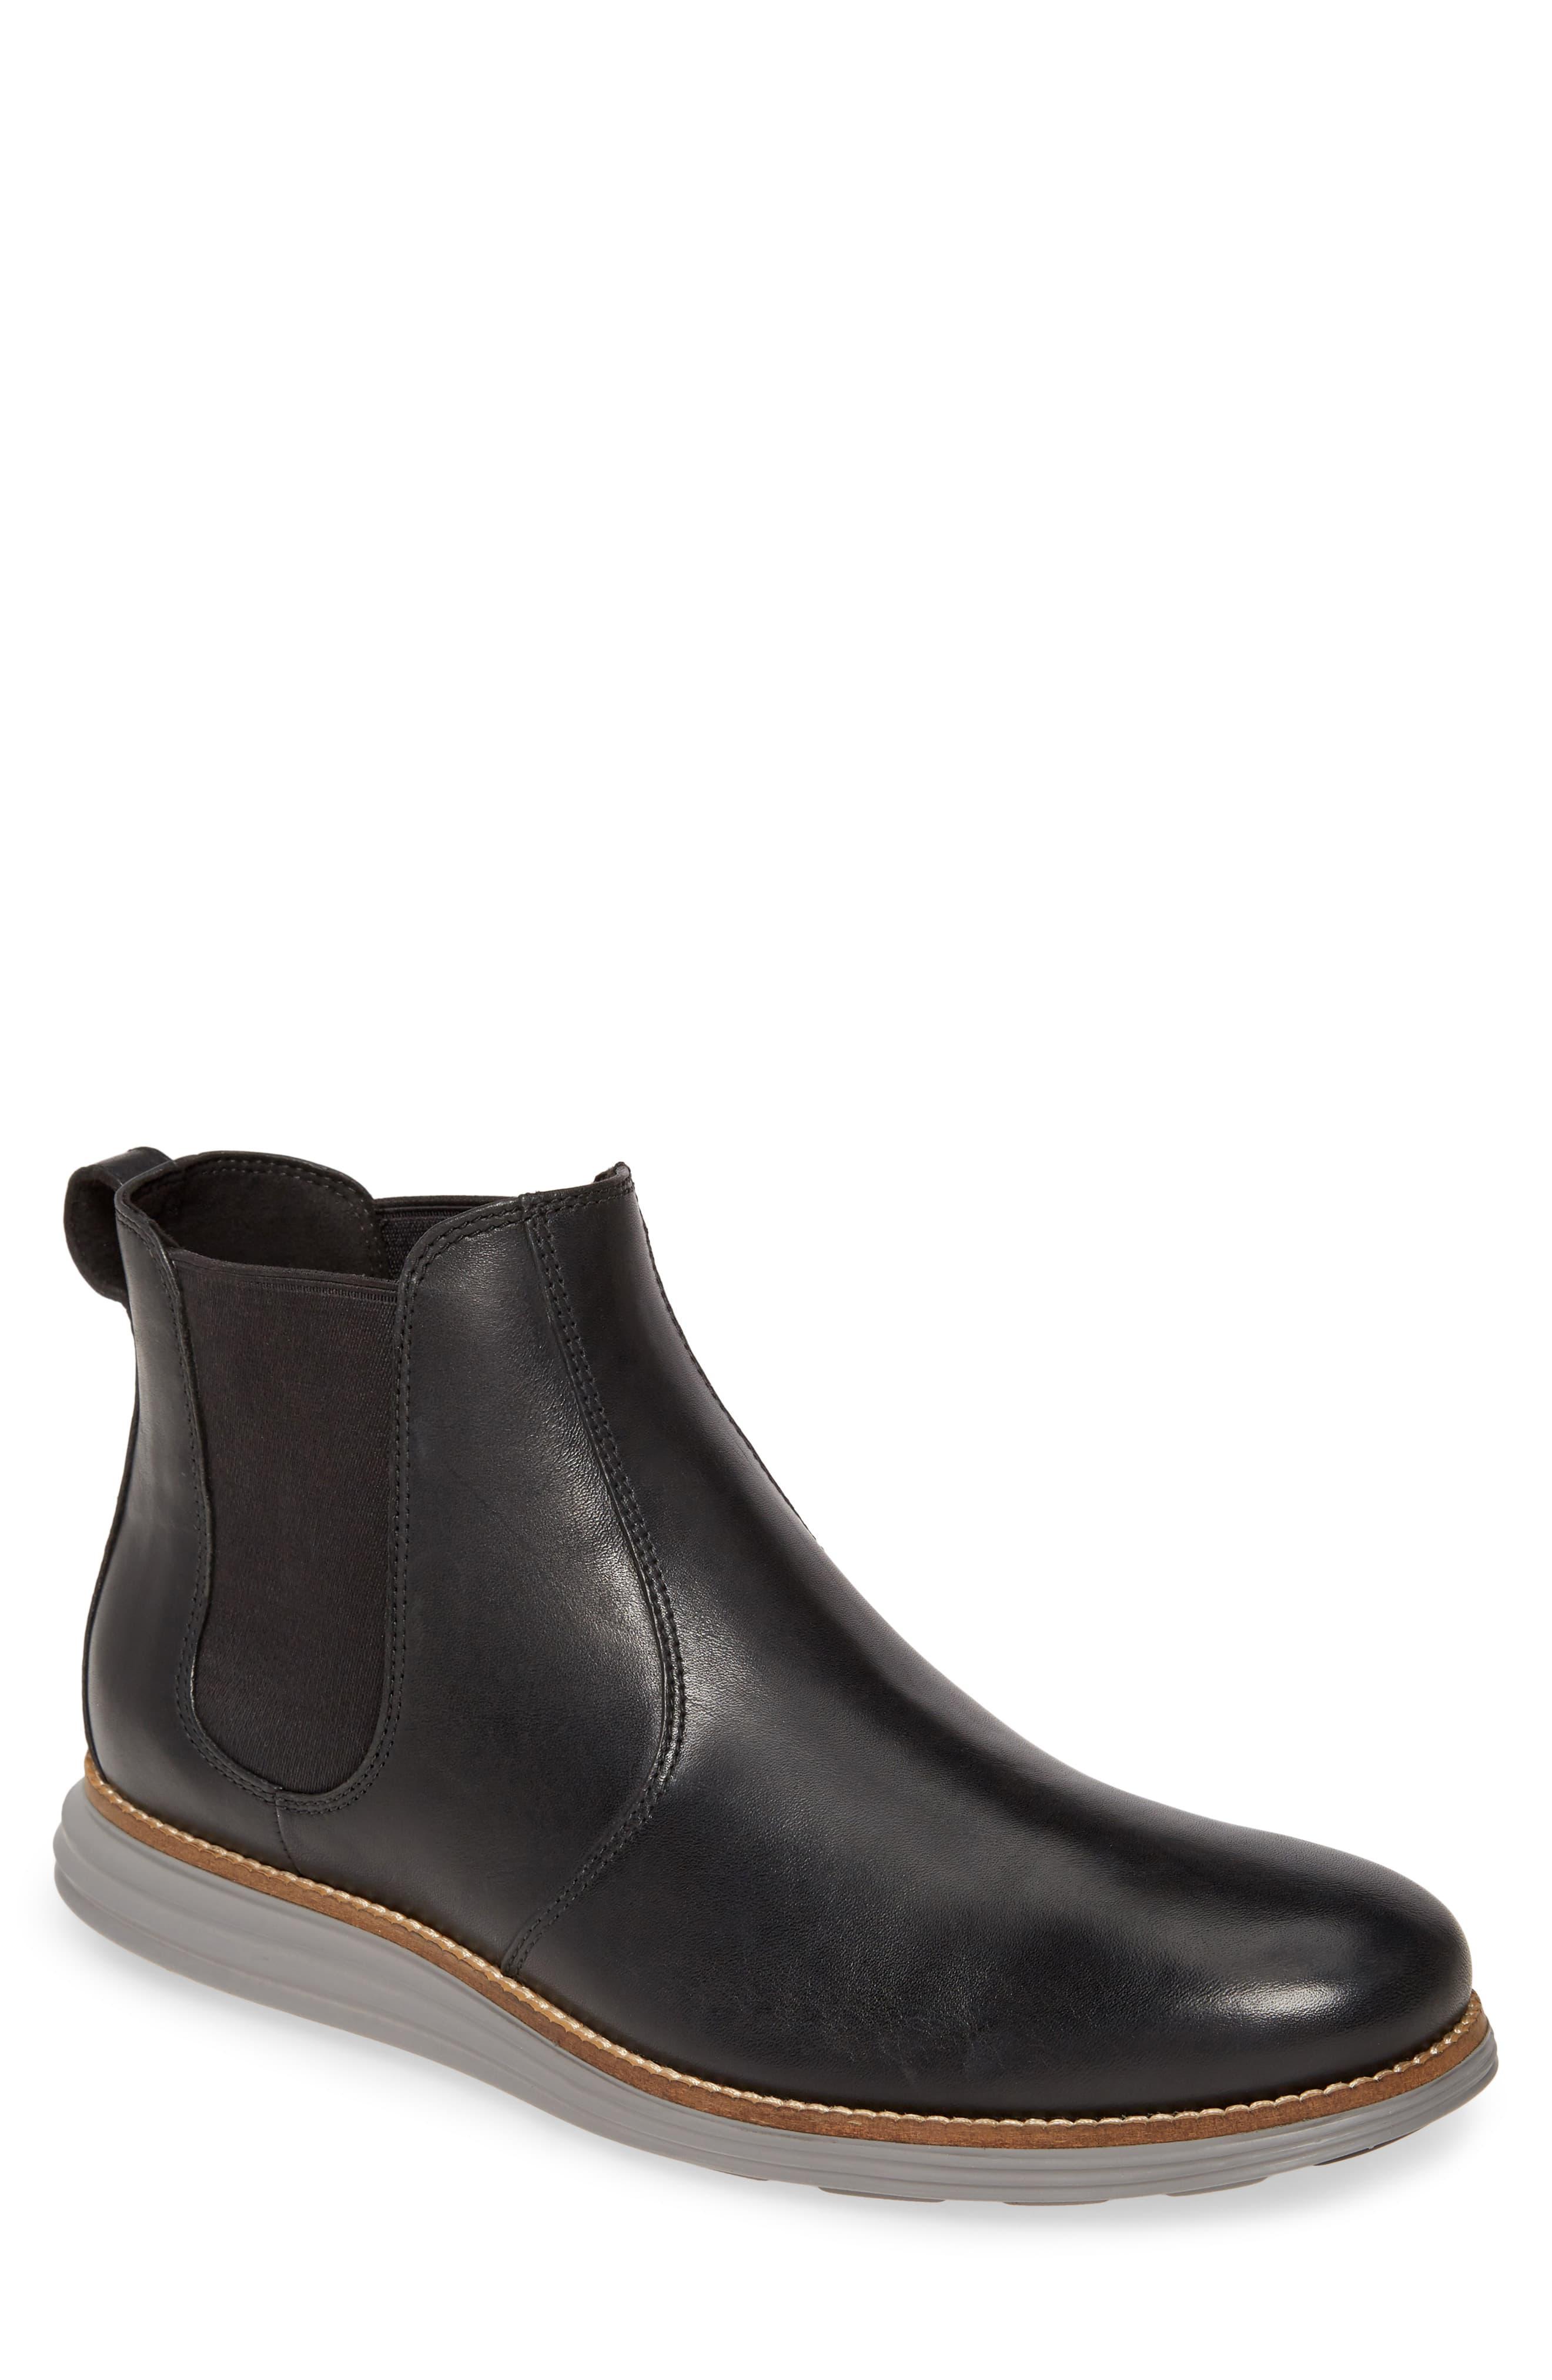 Cole Haan Original Grand Waterproof Leather Chelsea Boots in Black for ...